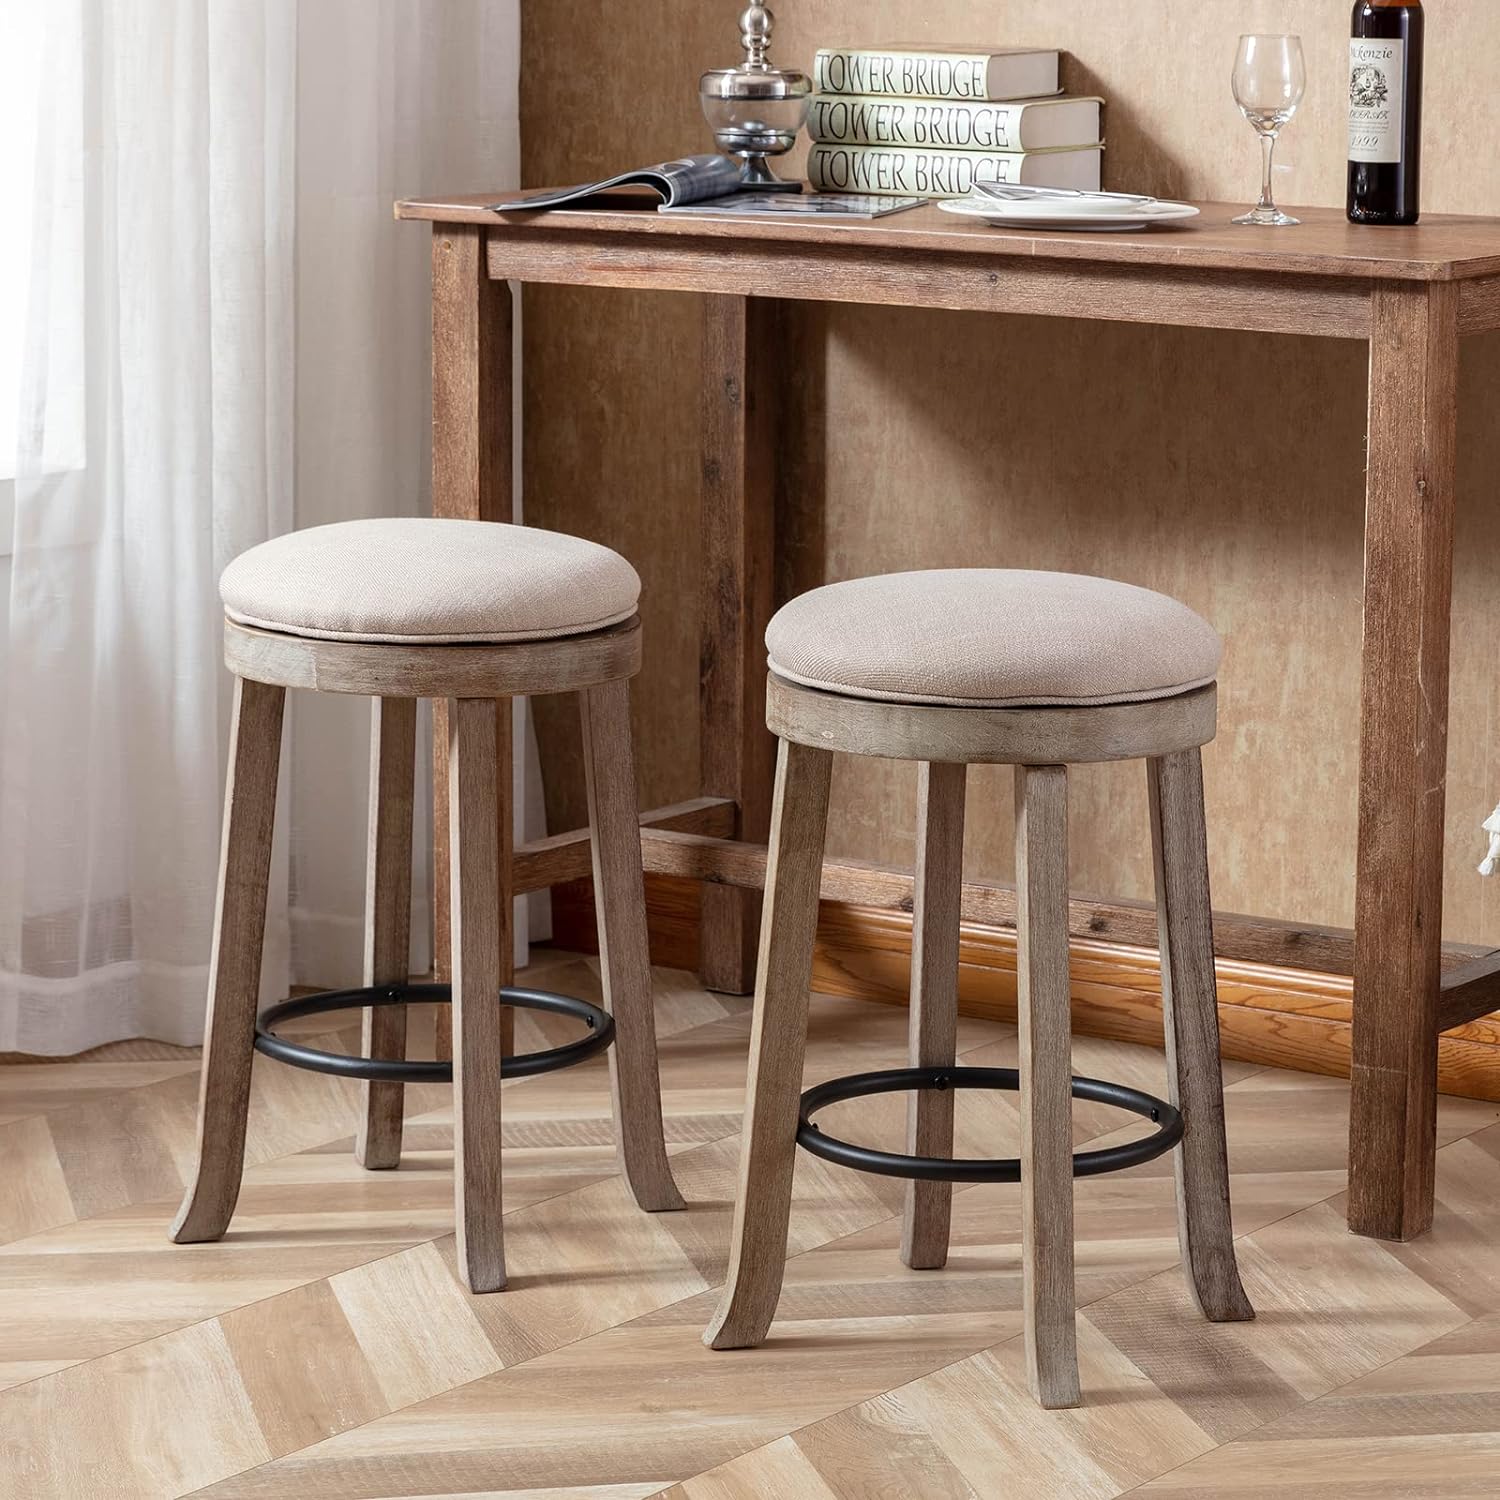 Run dont walk to make a purchase from YOUJIE PRODUCTS. Im not fond of writing reviews but when I come across a great product and a great seller its warranted. YOUJIE PRODUCTS french vintage bar stools are top tier, both aesthetic and great quality! I was a bit reluctant to purchase a used item through Amazon 3rd party since Id never done so before but Im so satisfied with the product and service Im grateful I decided to follow through. Highly recommend this item and seller, YOUJIE PRODUCTS